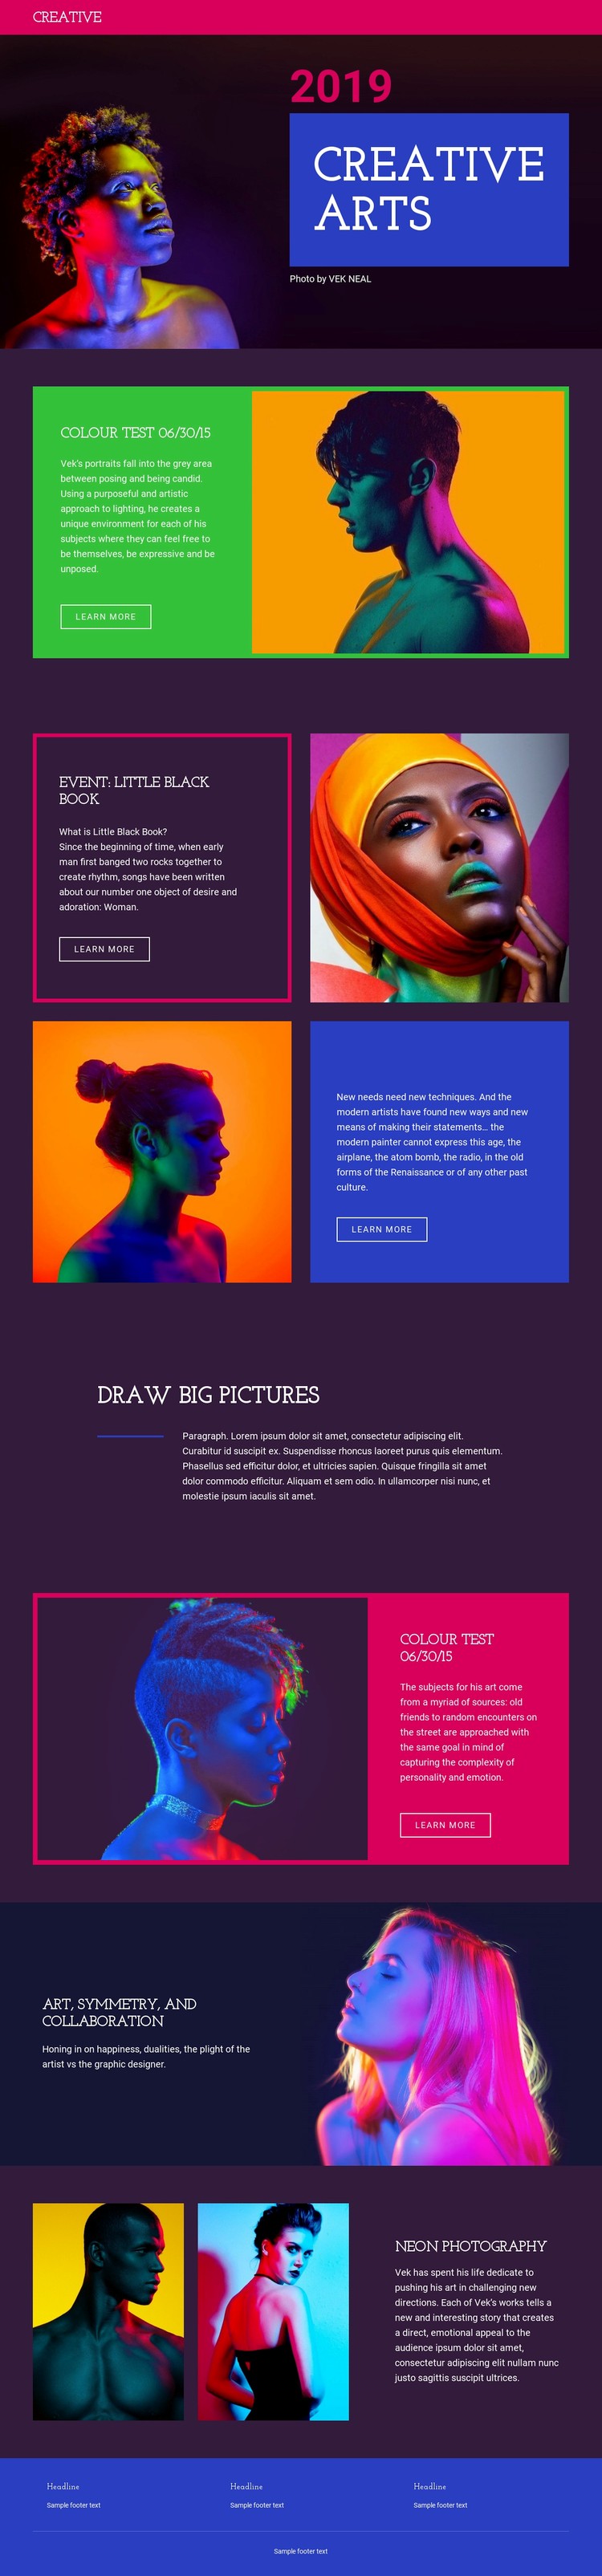 Limited-edition photography Webflow Template Alternative